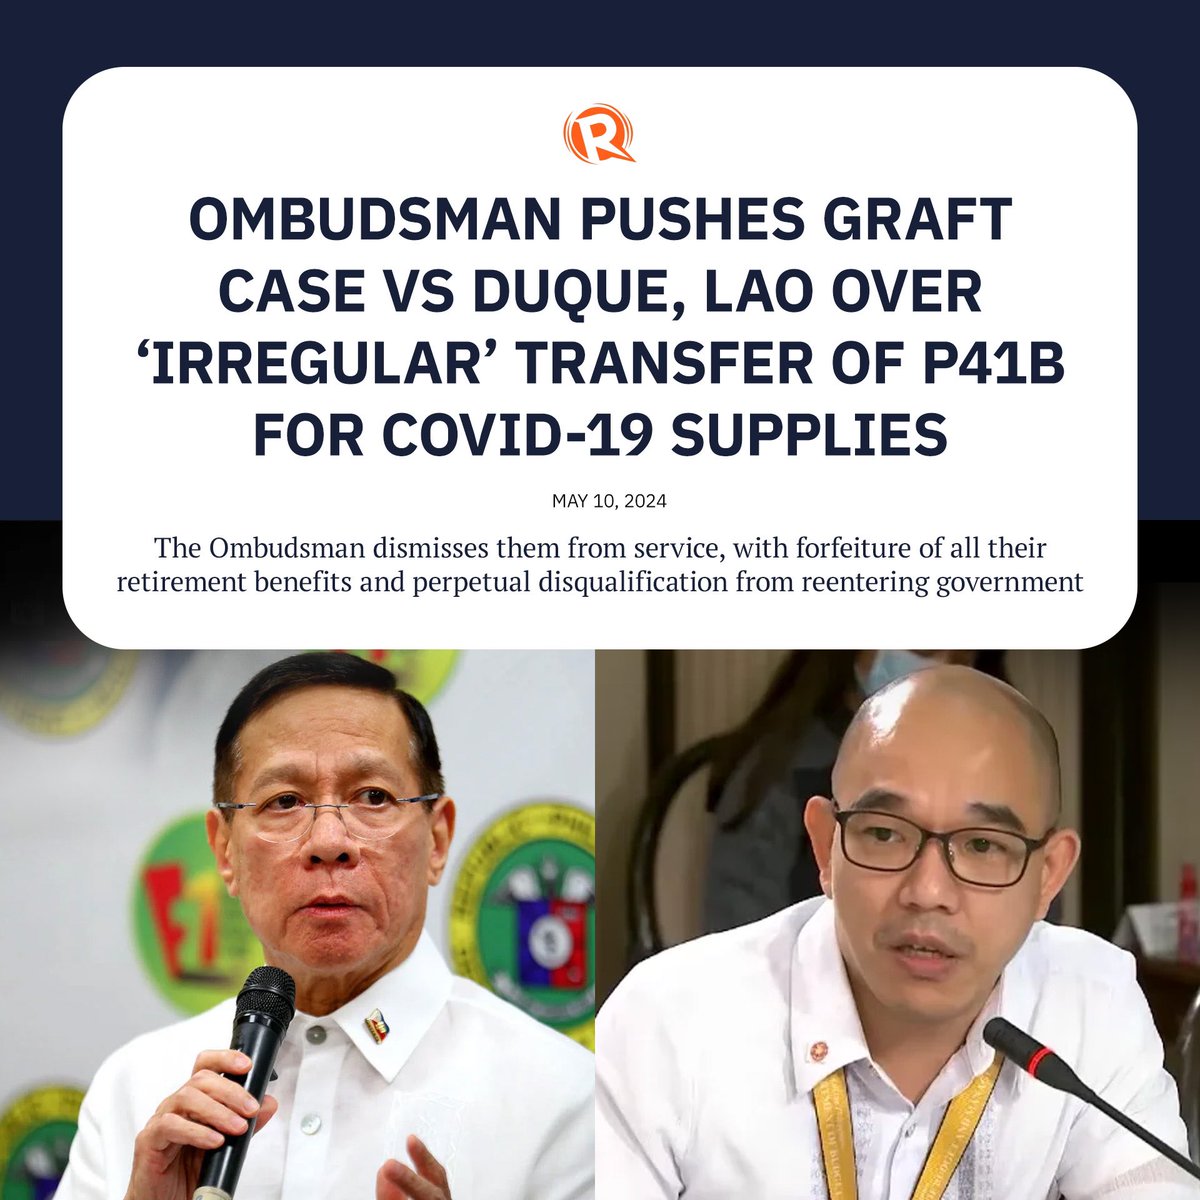 DUQUE AND LAO MUST BE JAILED!!! 

@DOHgovph 
@DBMgovph @PS_DBMgovph